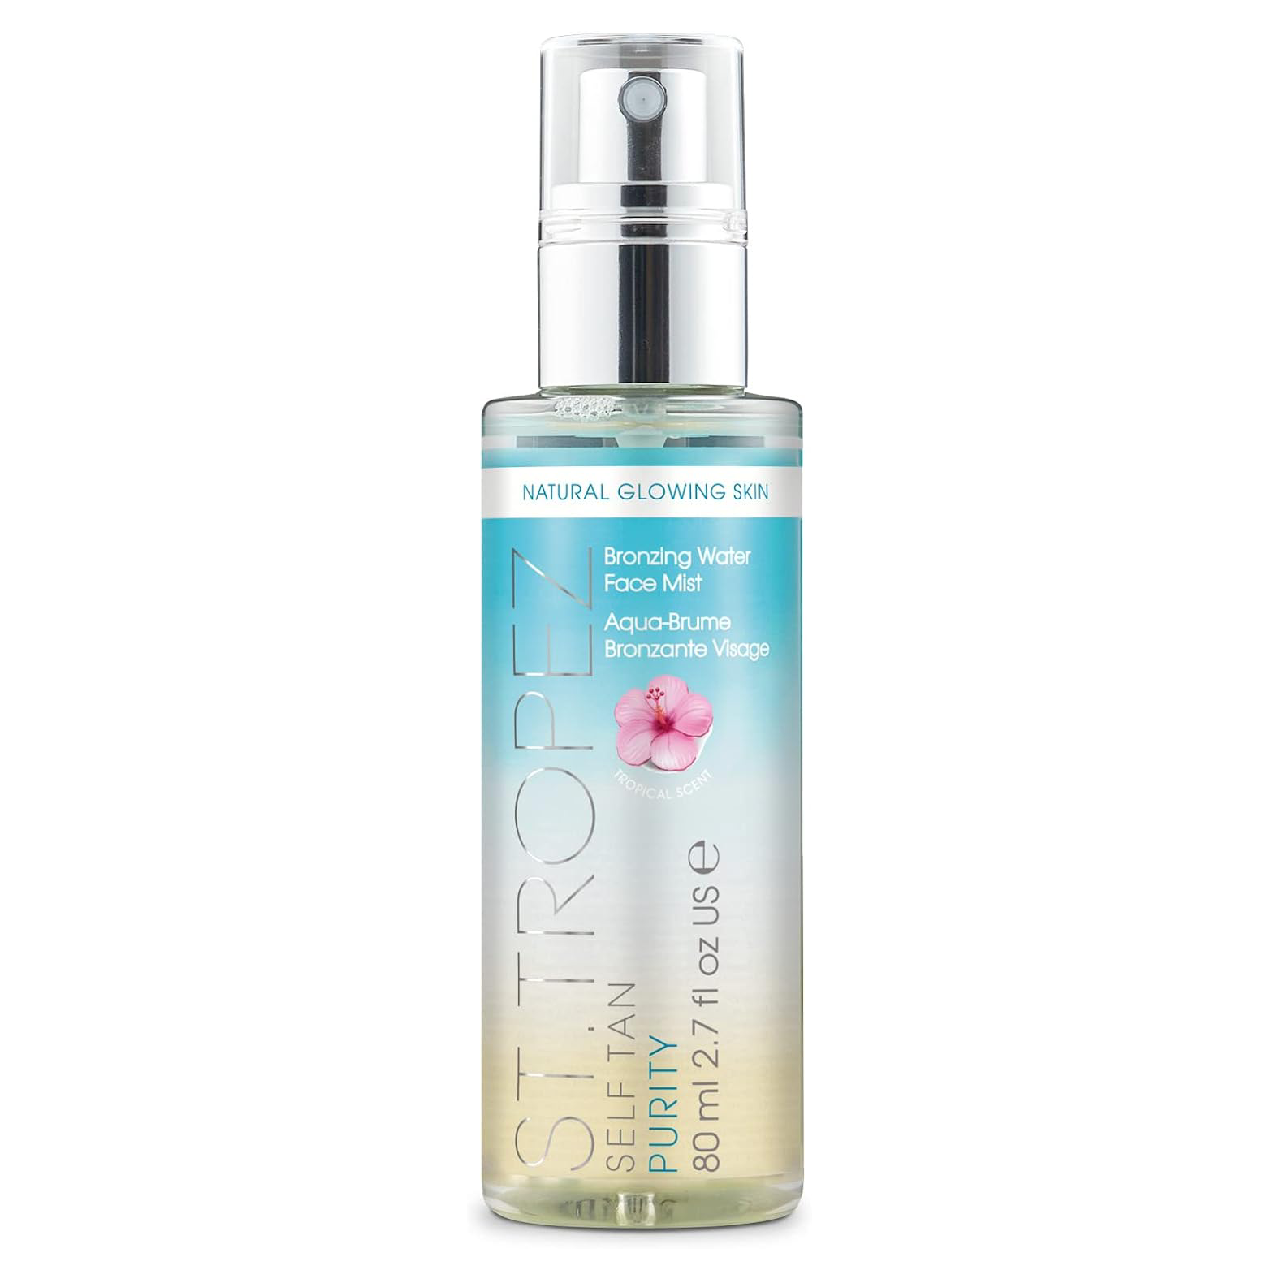 Bottle of St. Tropez Self Tan Purity Bronzing Water Face Mist against a clean white background.